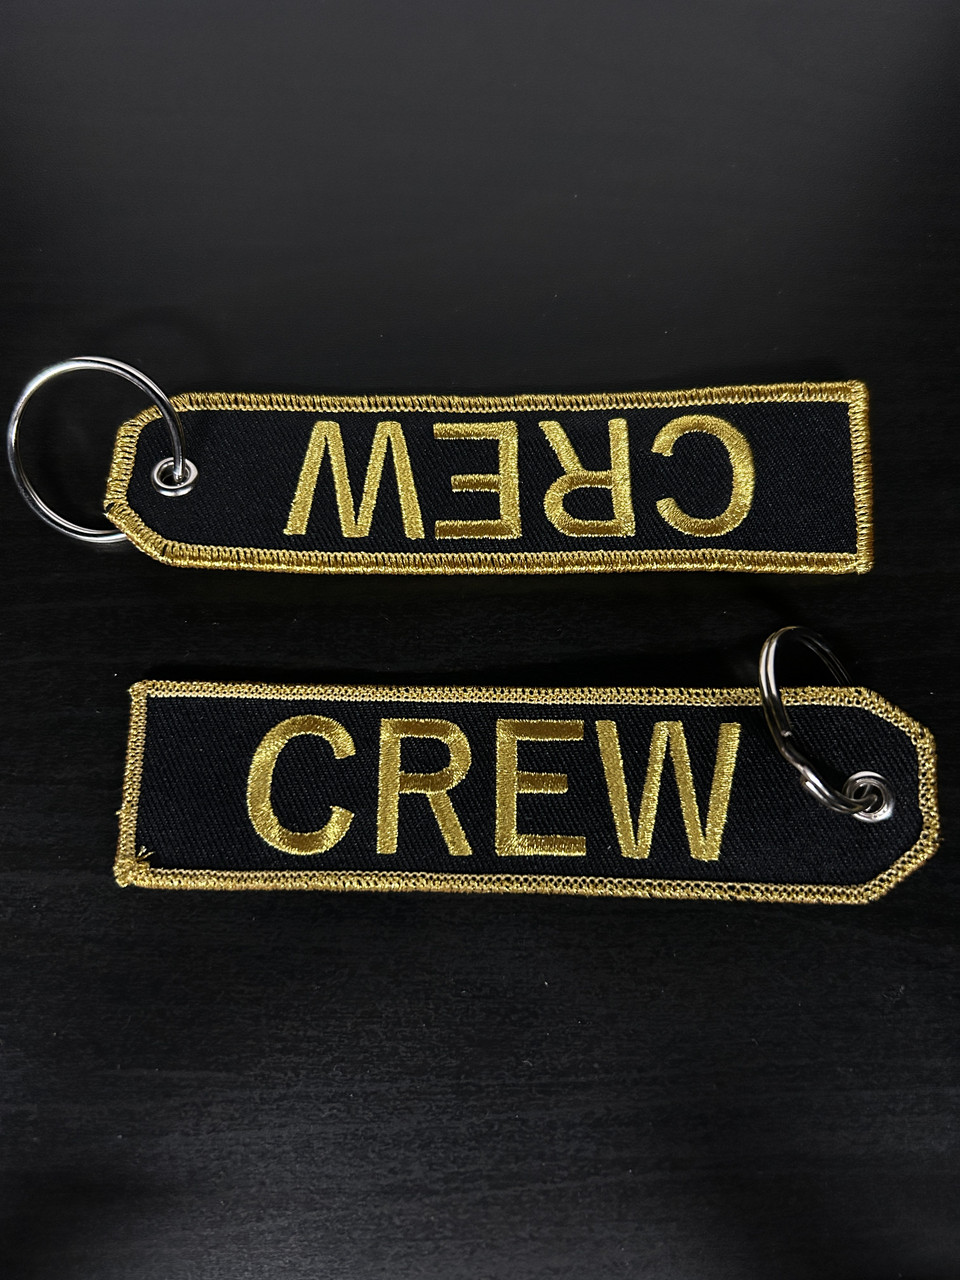 Embroidered Keychain - Crew (Black & Gold)